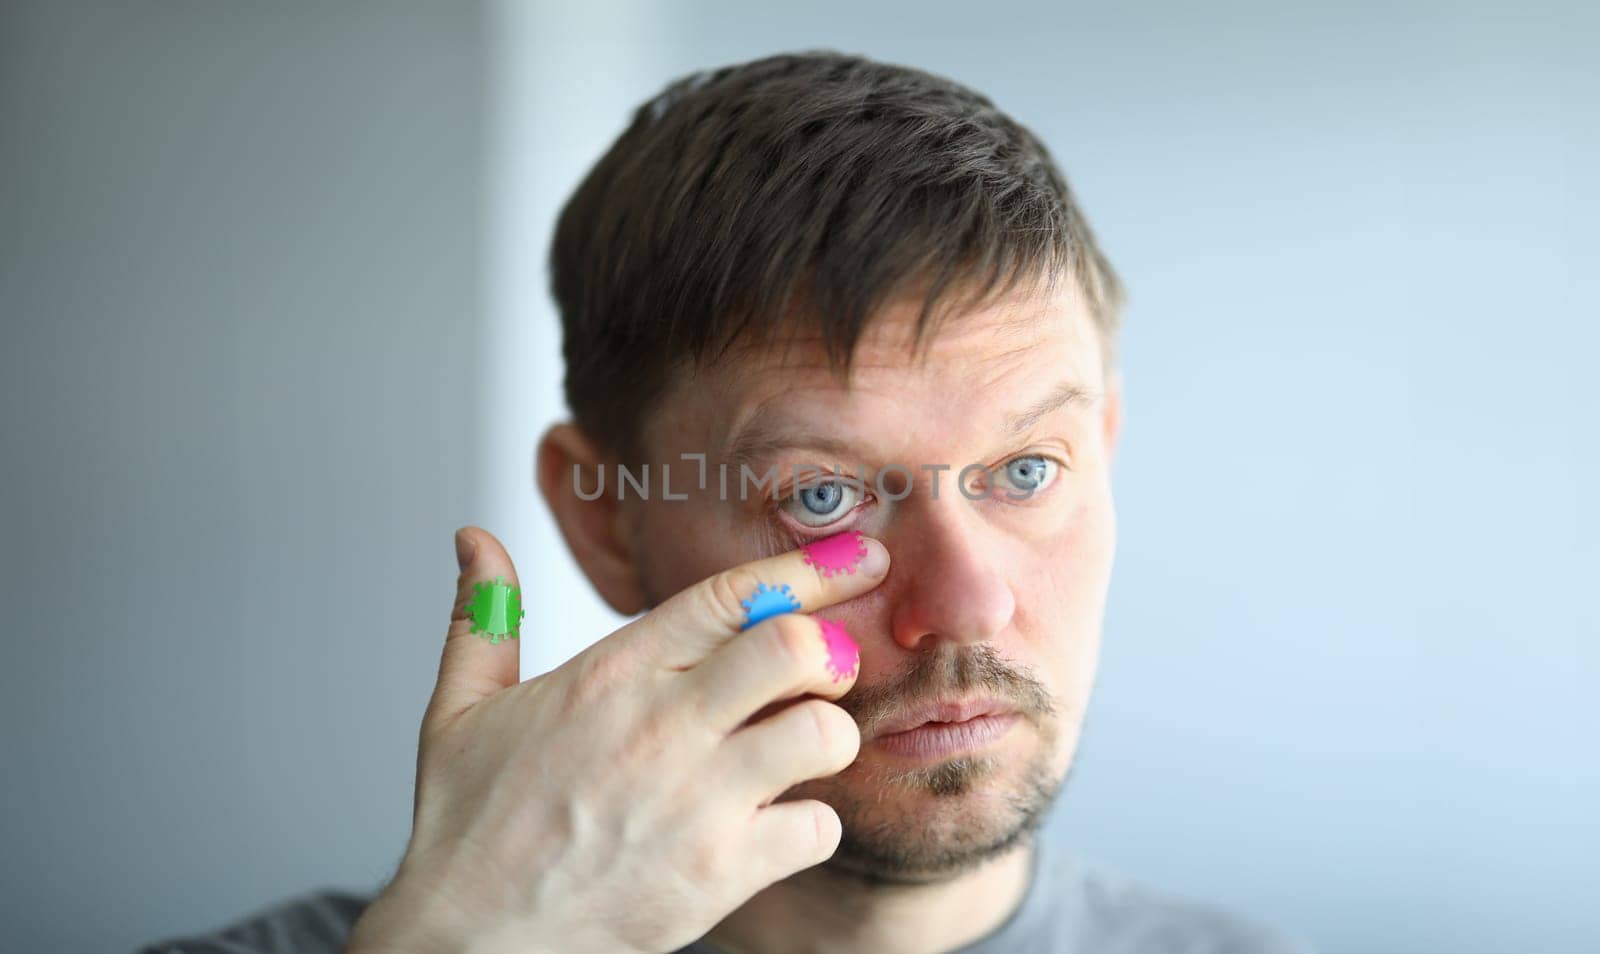 Man scratches his face with a dirty hand near his eye portrait. Virus infection concept